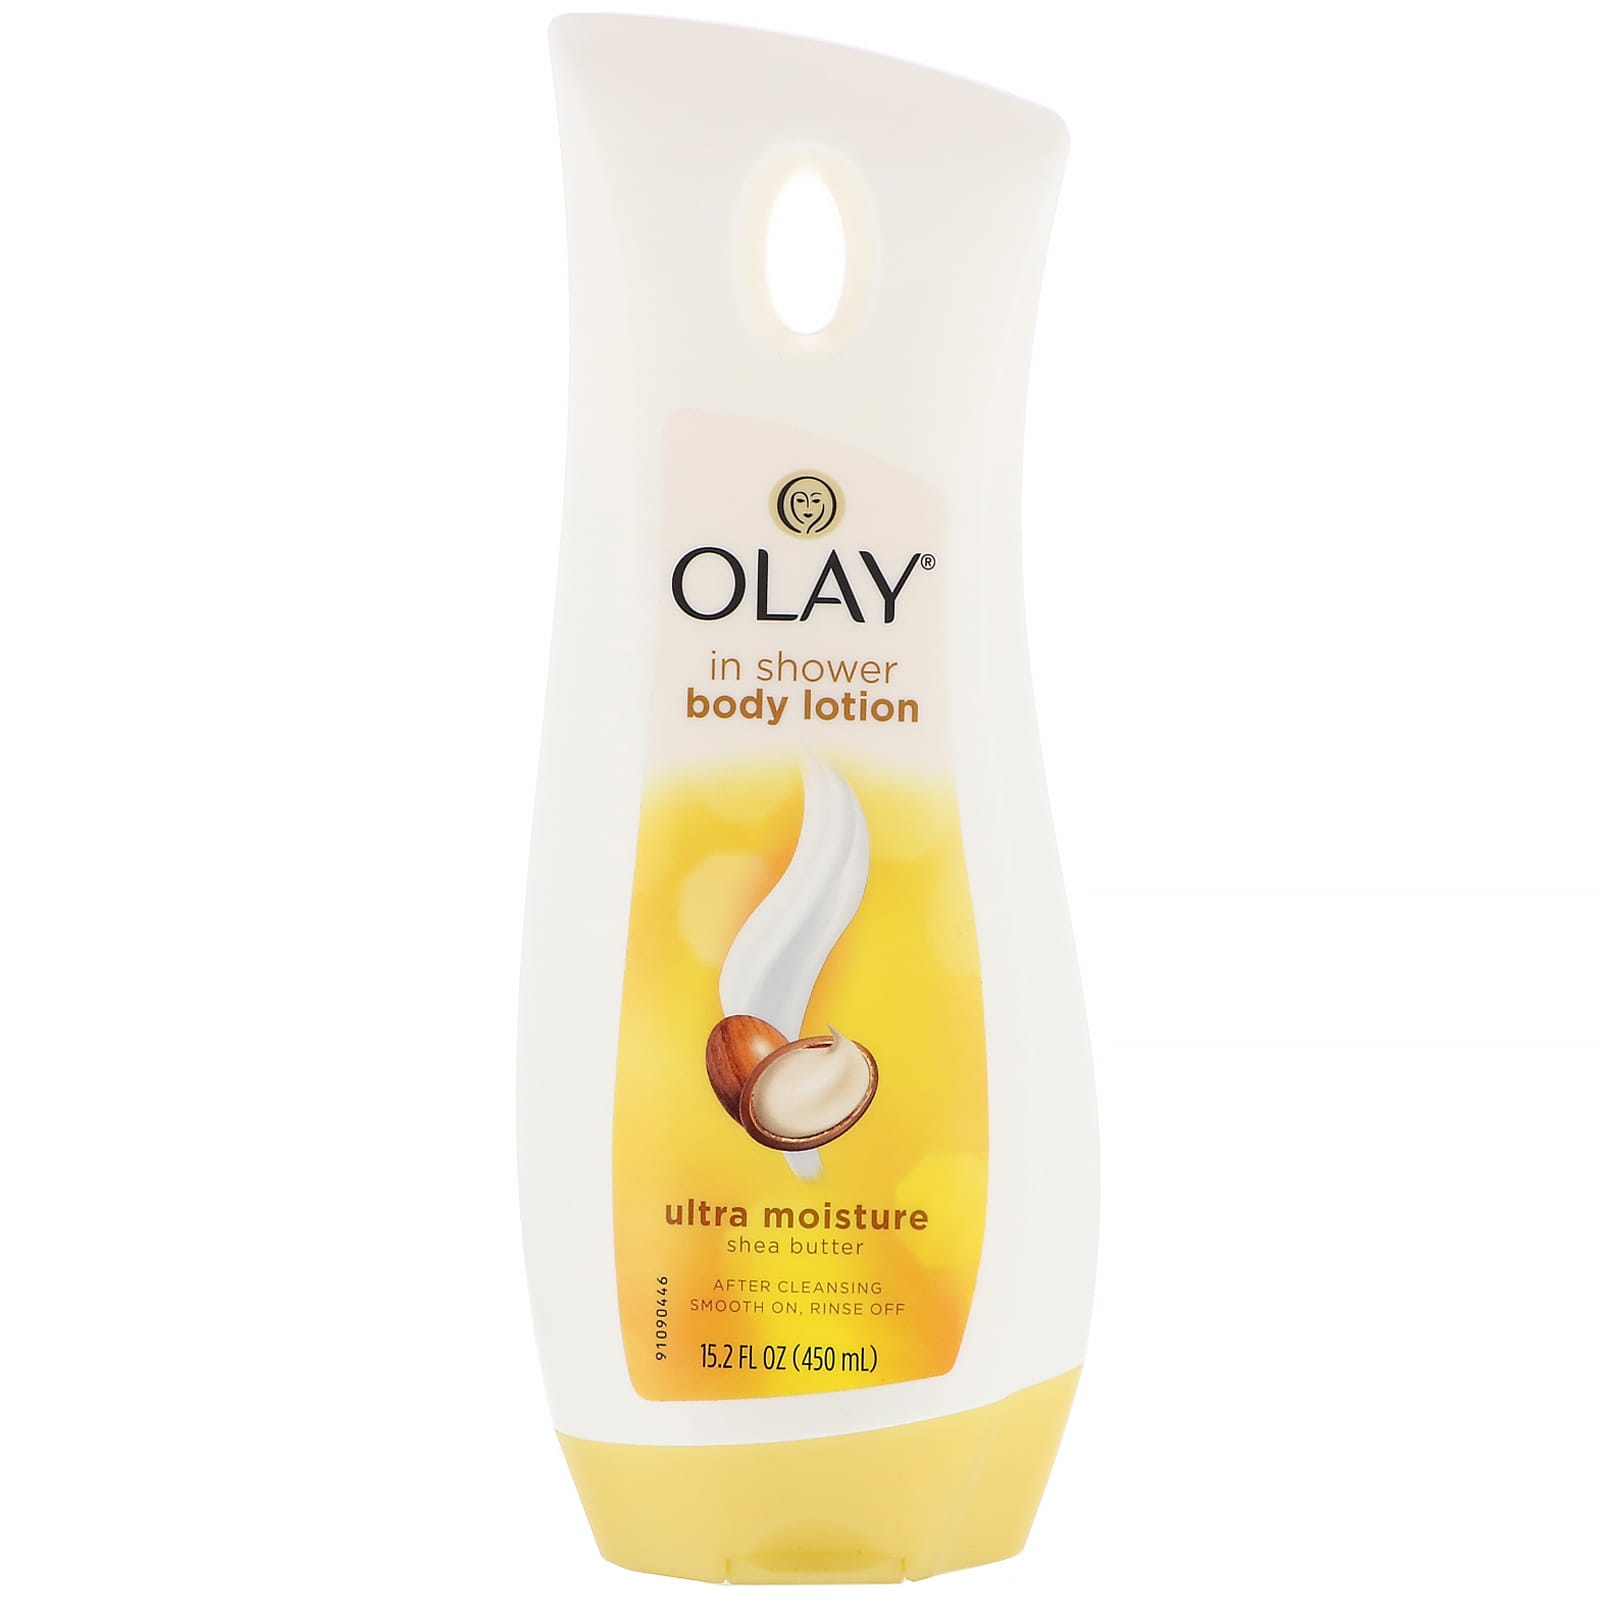 Olay, In Shower Body Lotion, Ultra Moisture Shea Butter (450 ml)